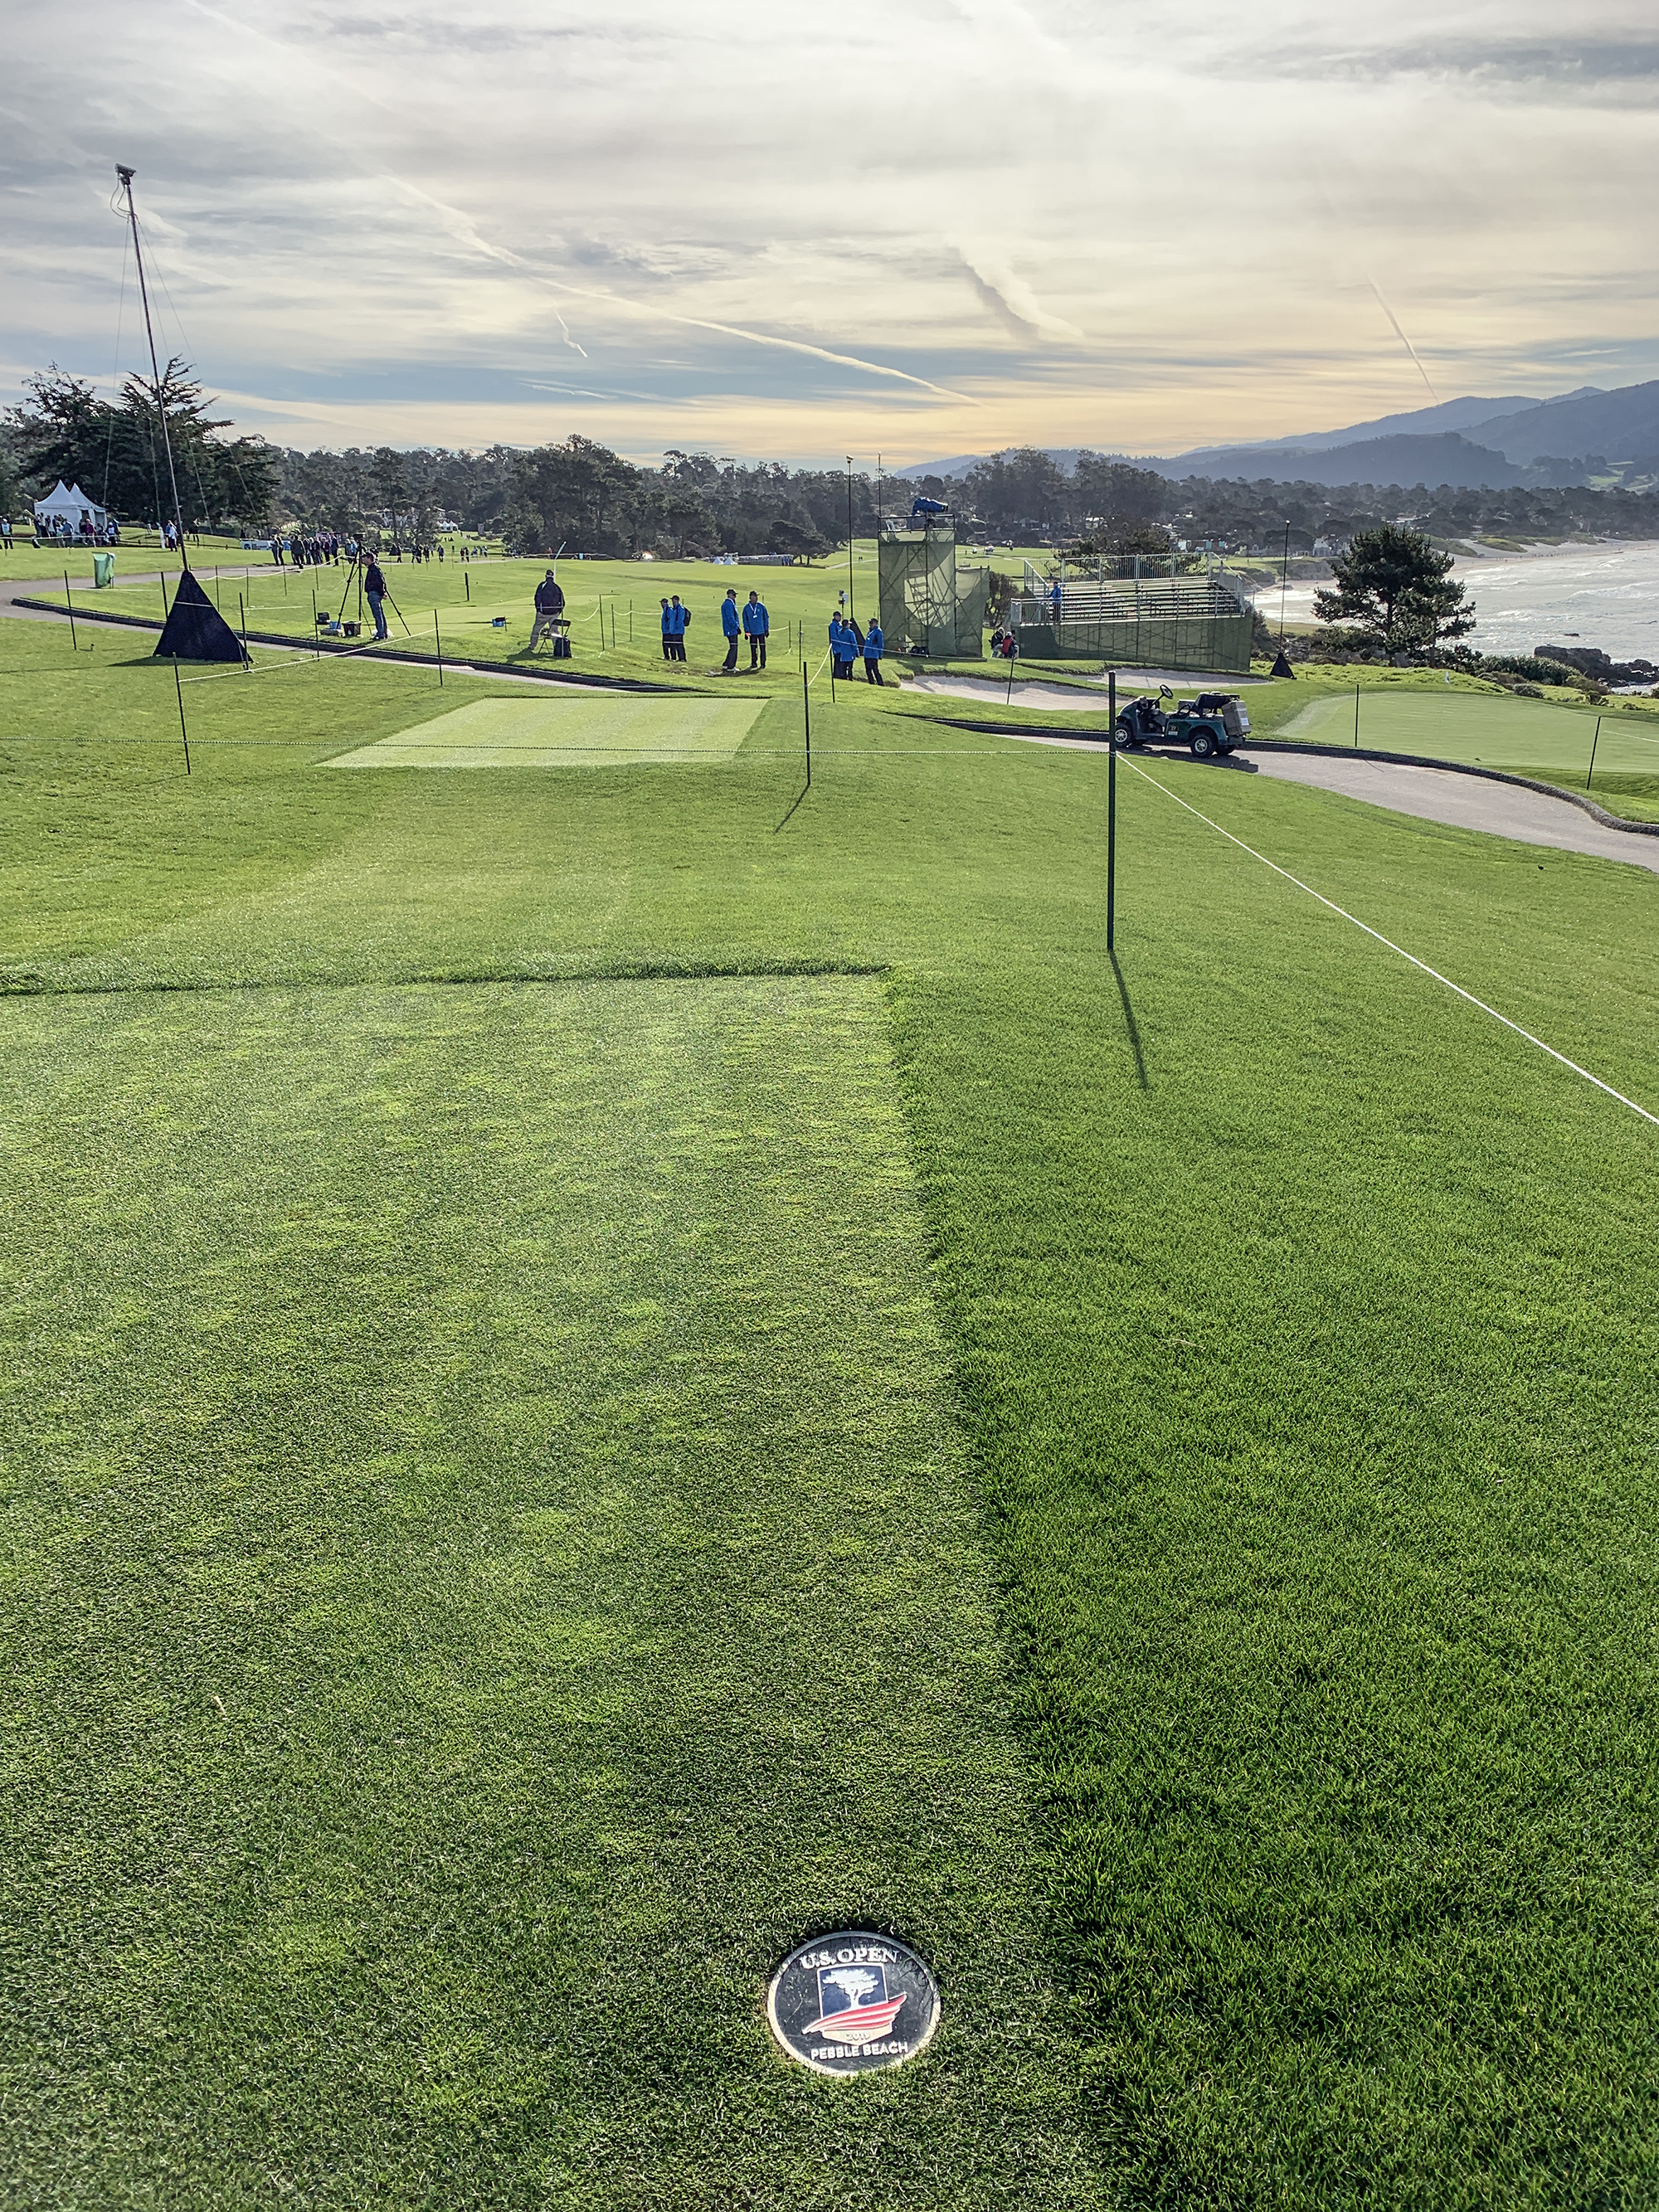 u.s. open tees for ninth hole at Pebble Beach